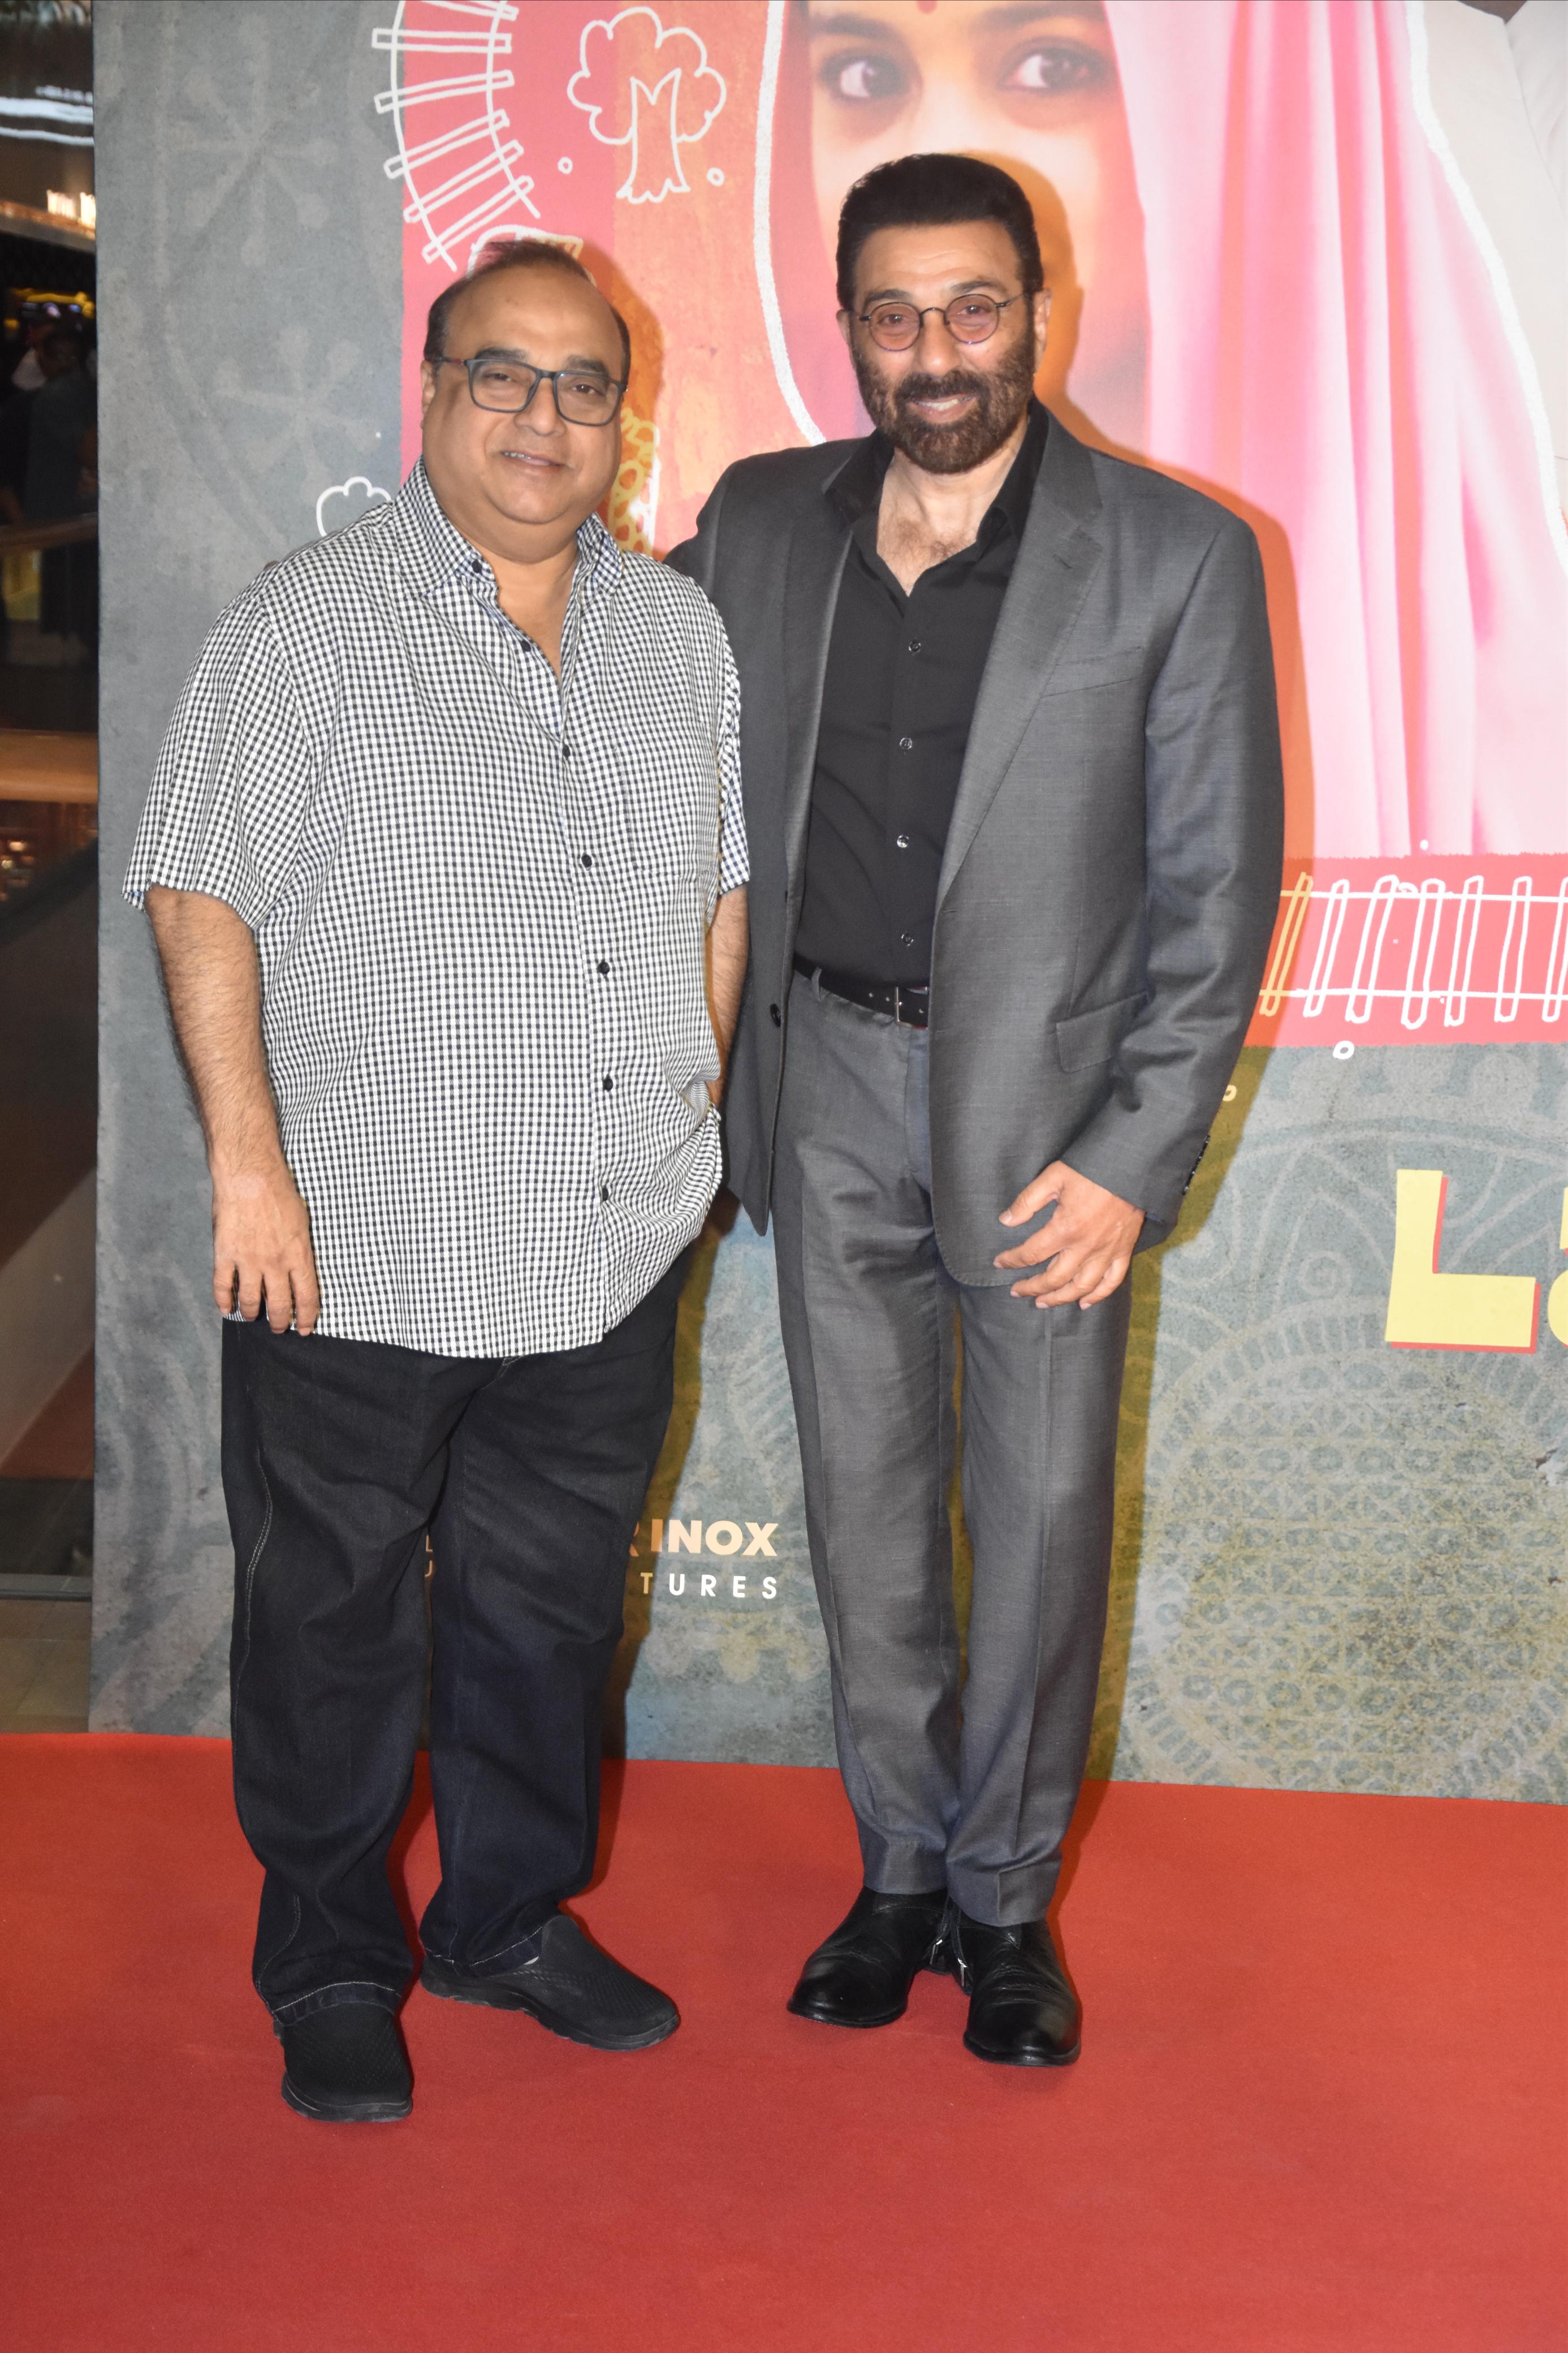 Sunny Deol and Rajkumar Santoshi posed together at the red-carpet of the event